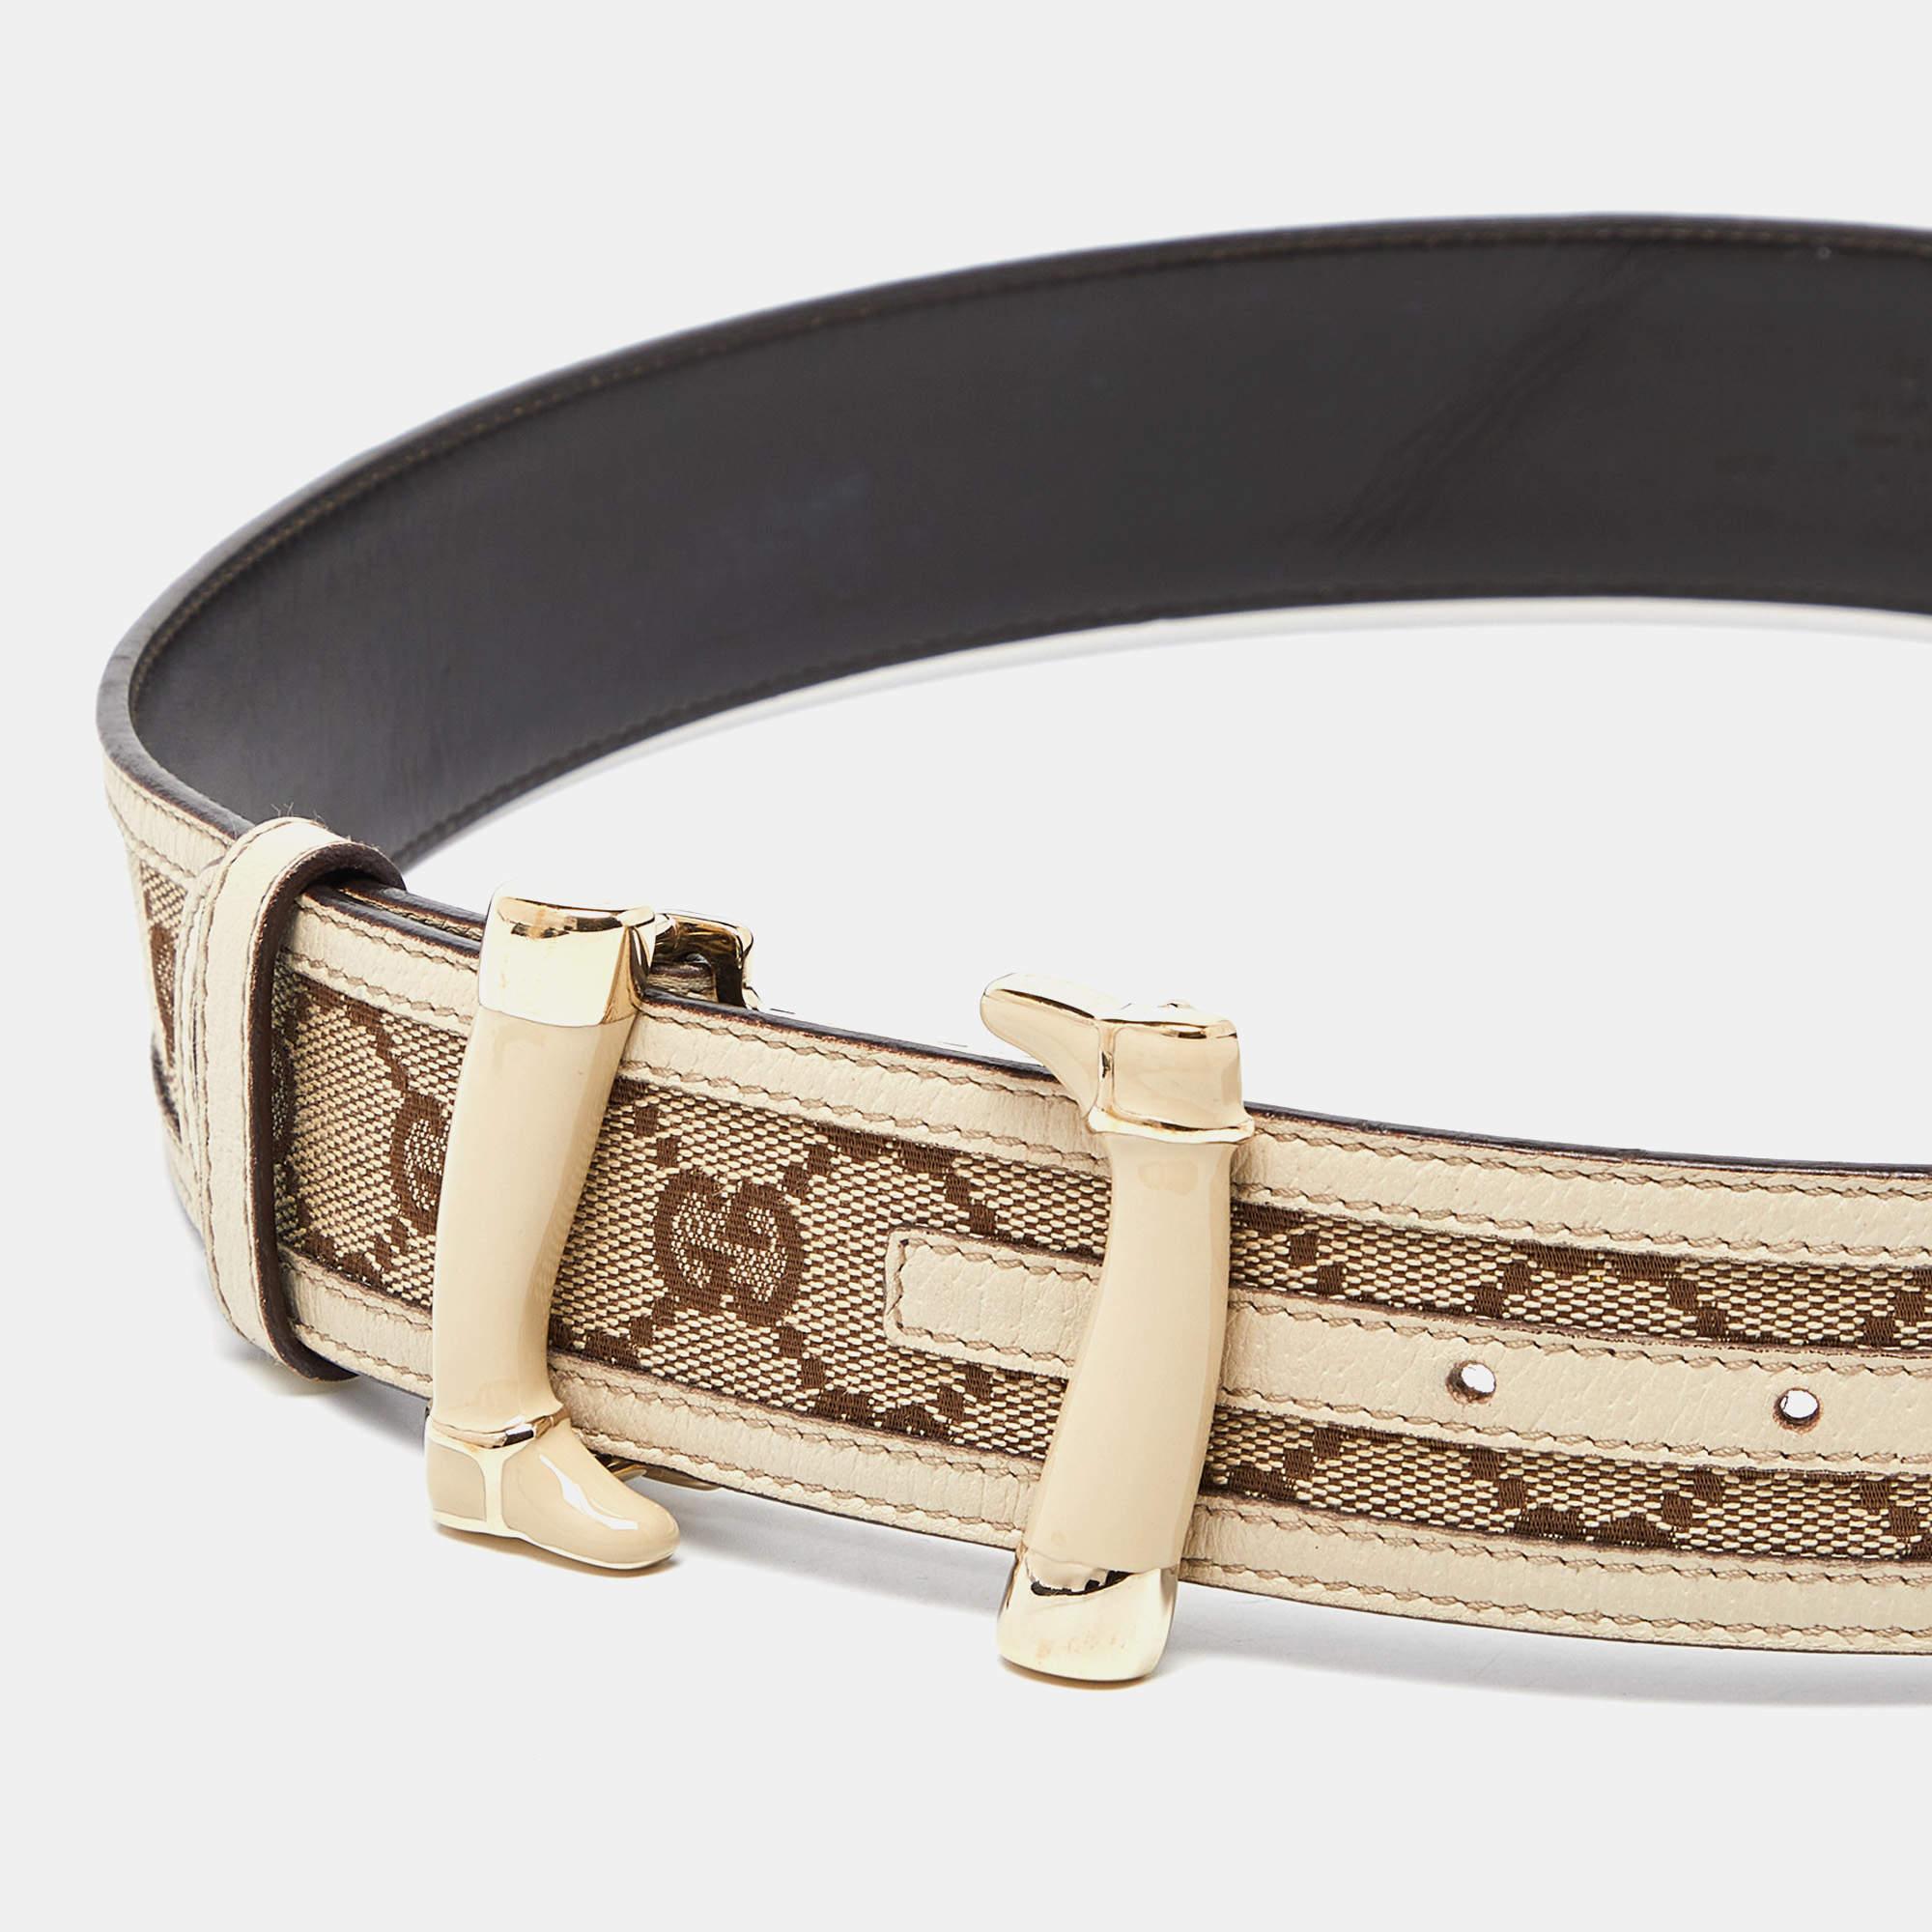 Light up your belt collection by adding this buckle belt from Gucci. Made from green GG canvas and leather, it features the iconic interlocking G buckle in gold-tone, accompanied by a single loop. This belt will look ideal with casuals.

Includes: